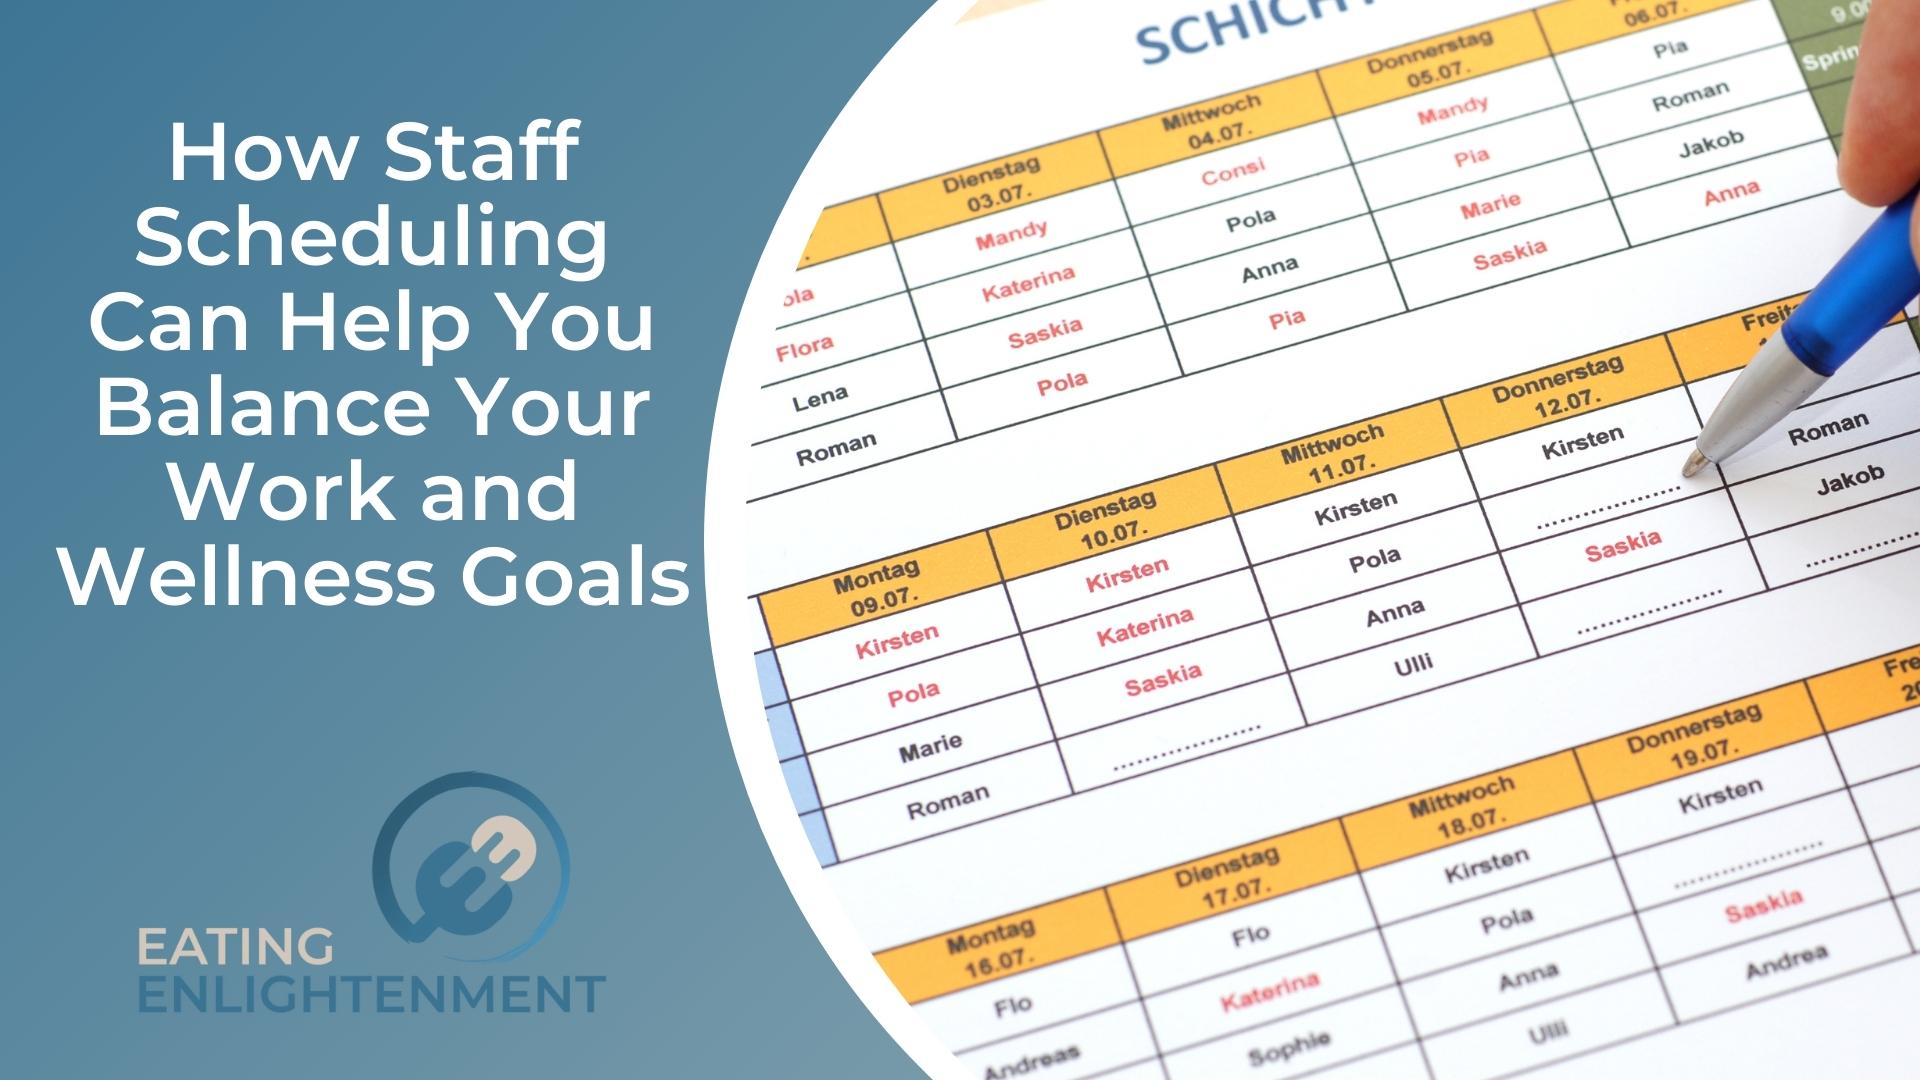 How Staff Scheduling Can Help You Balance Your Work and Wellness Goals